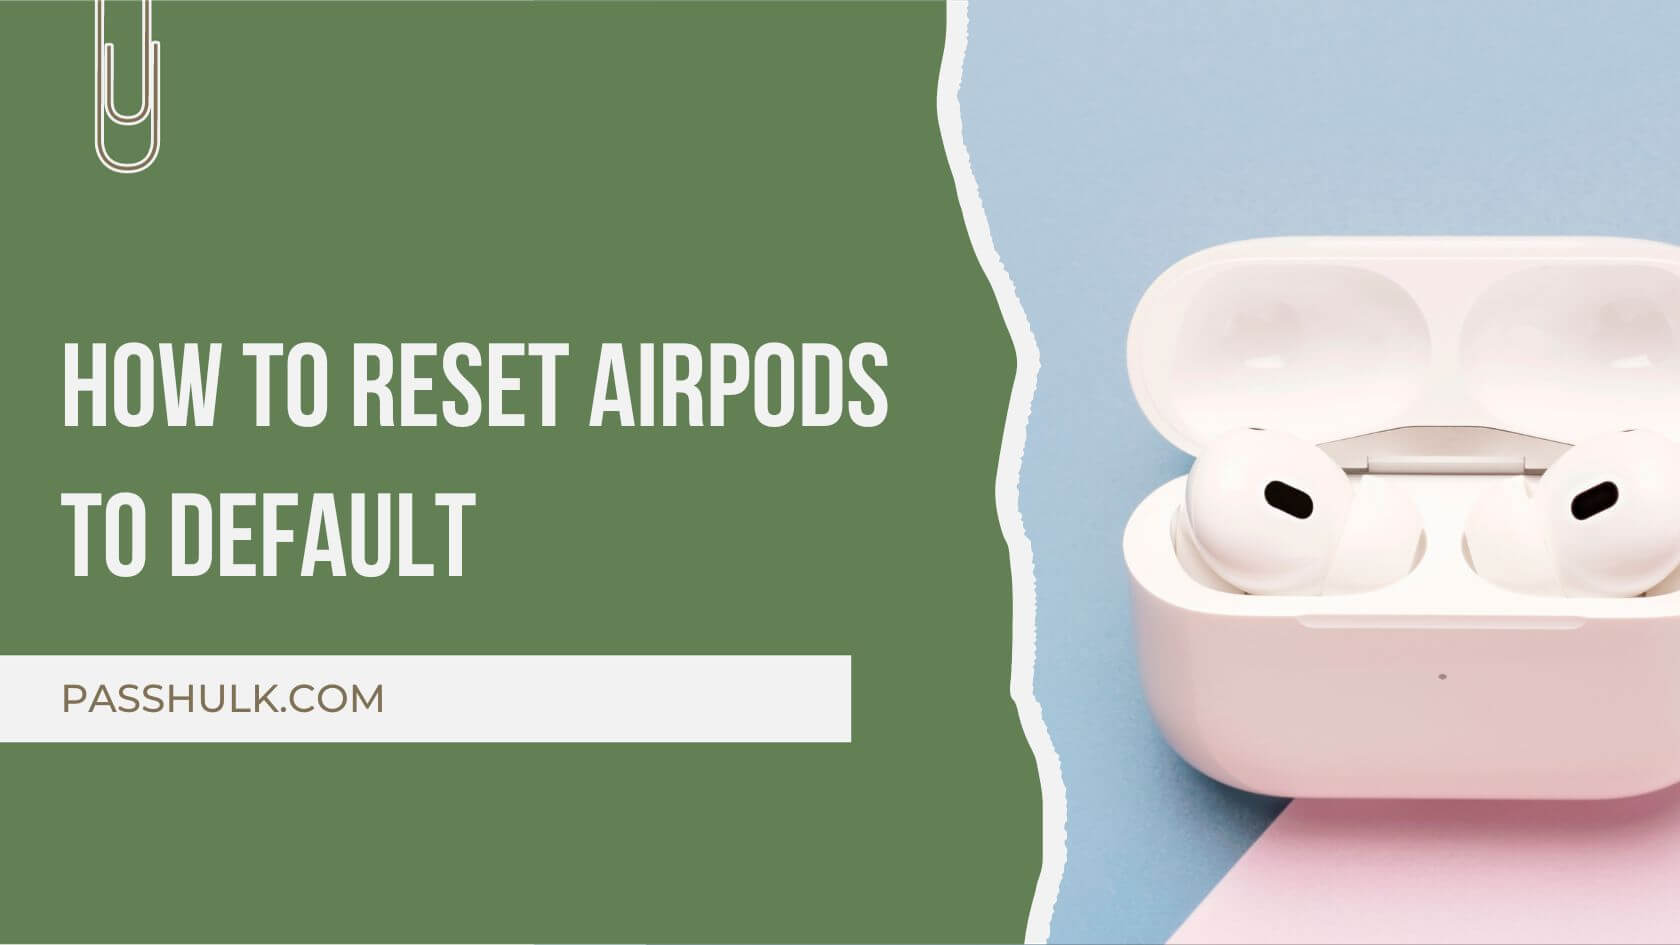 How To Reset AirPods To Default: The Complete Guide